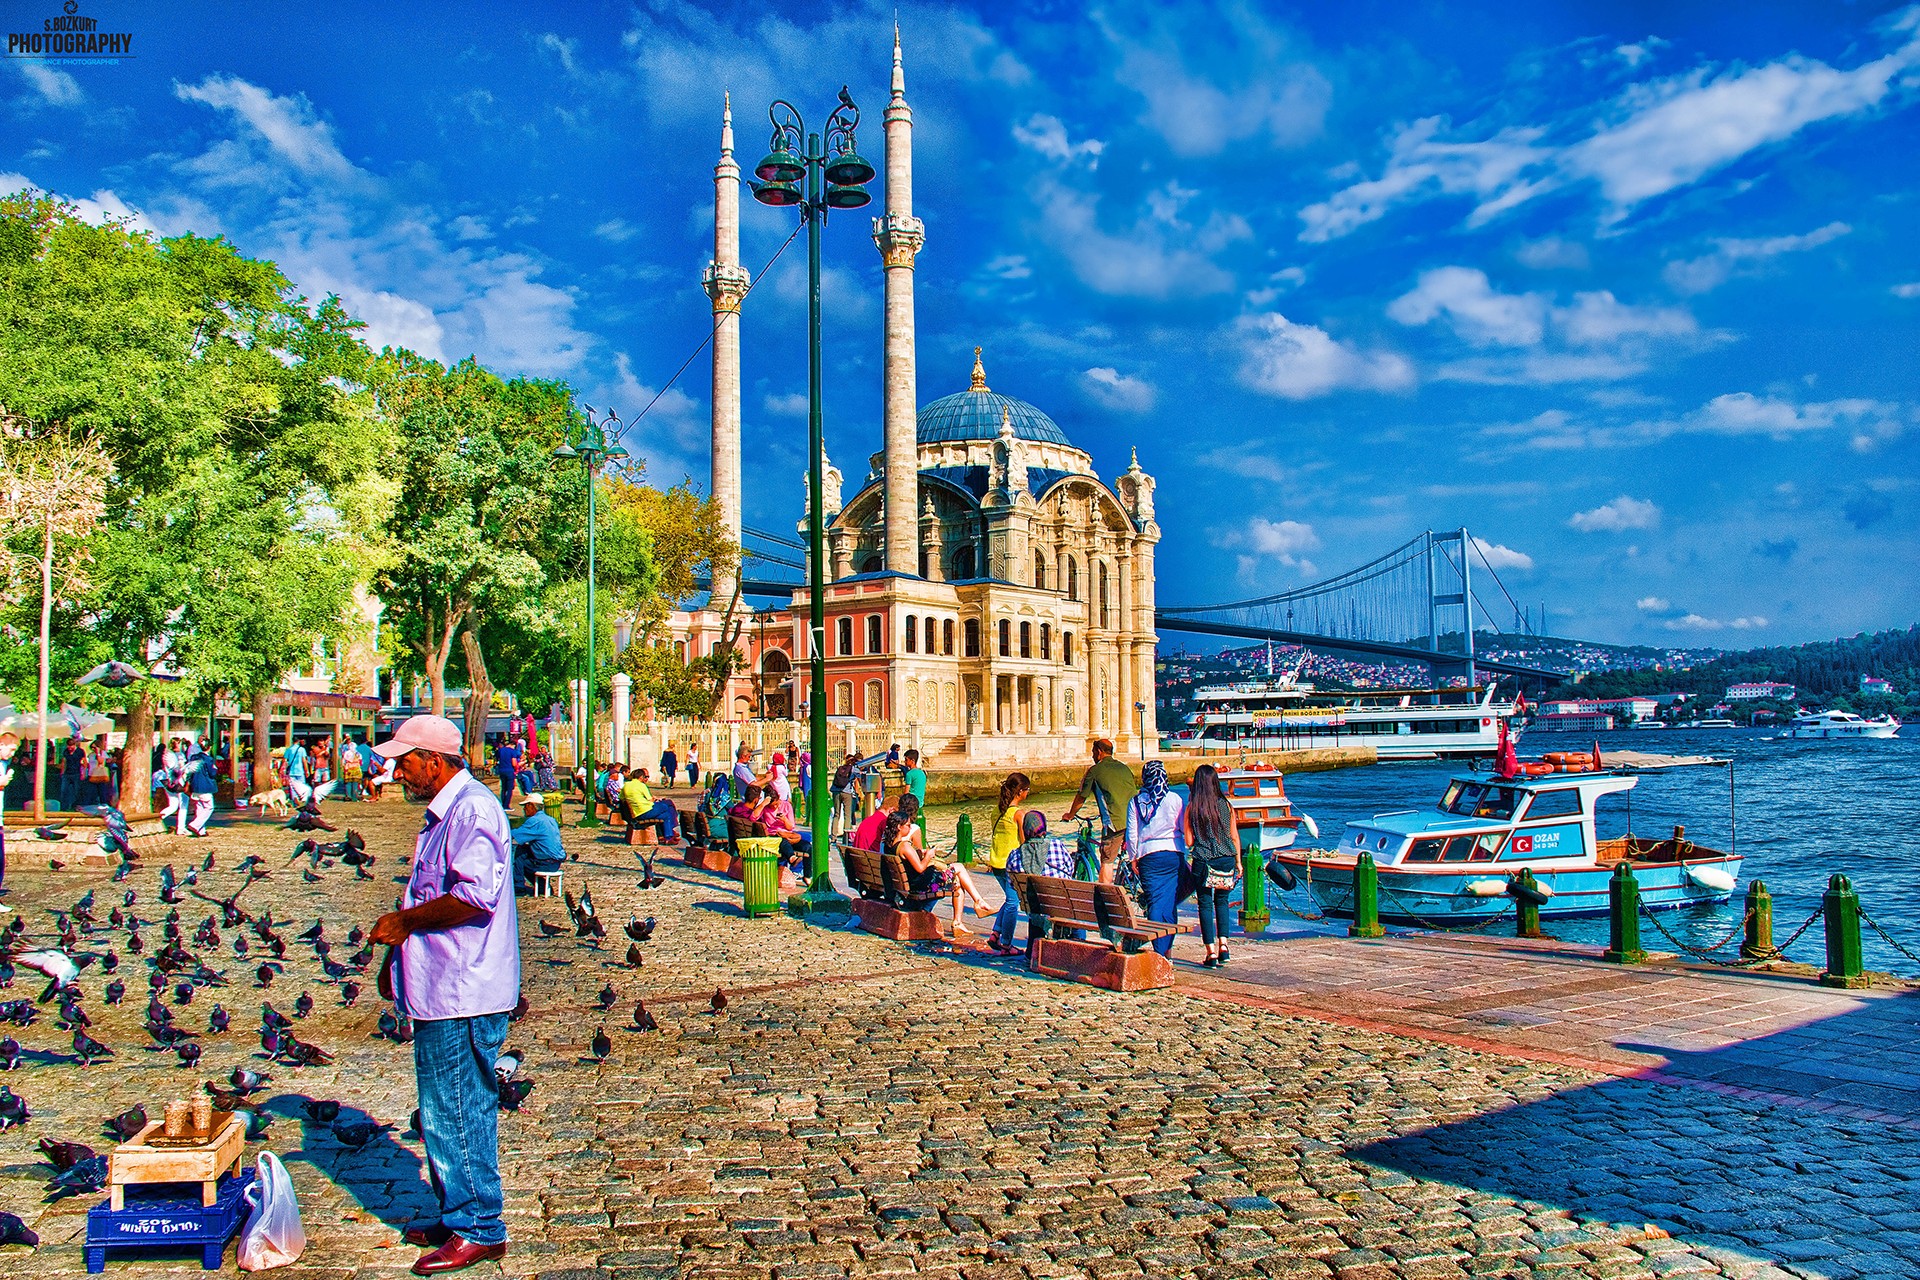 People 1920x1280 picture frames Turkey Istanbul Islam Islamic architecture HDR Ortaköy Mosque